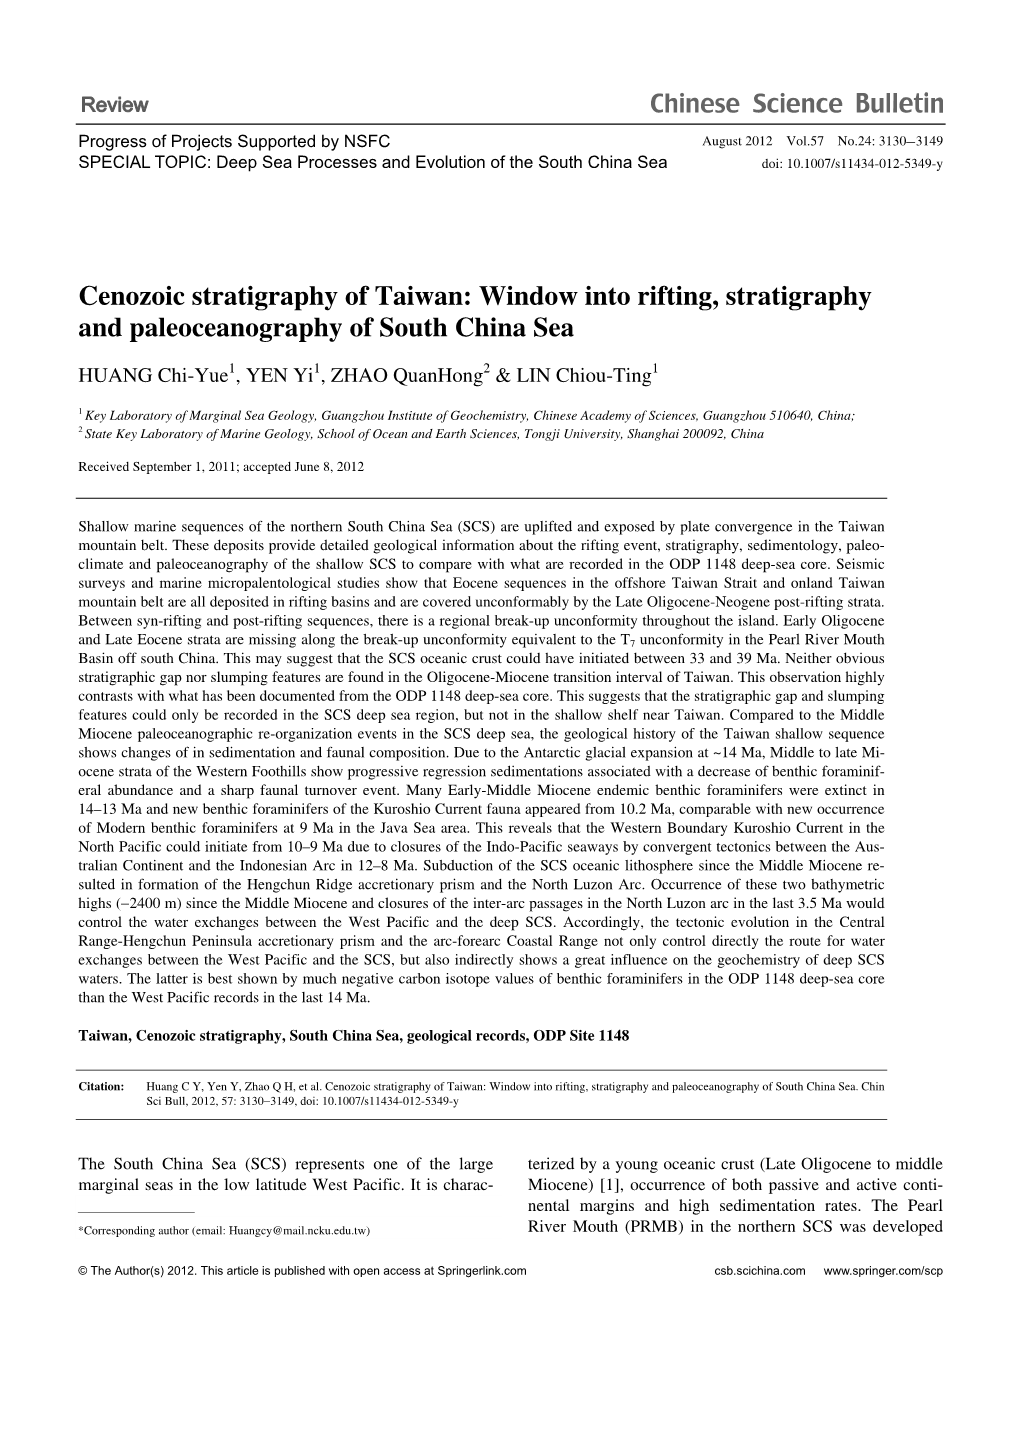 Cenozoic Stratigraphy of Taiwan: Window Into Rifting, Stratigraphy and Paleoceanography of South China Sea